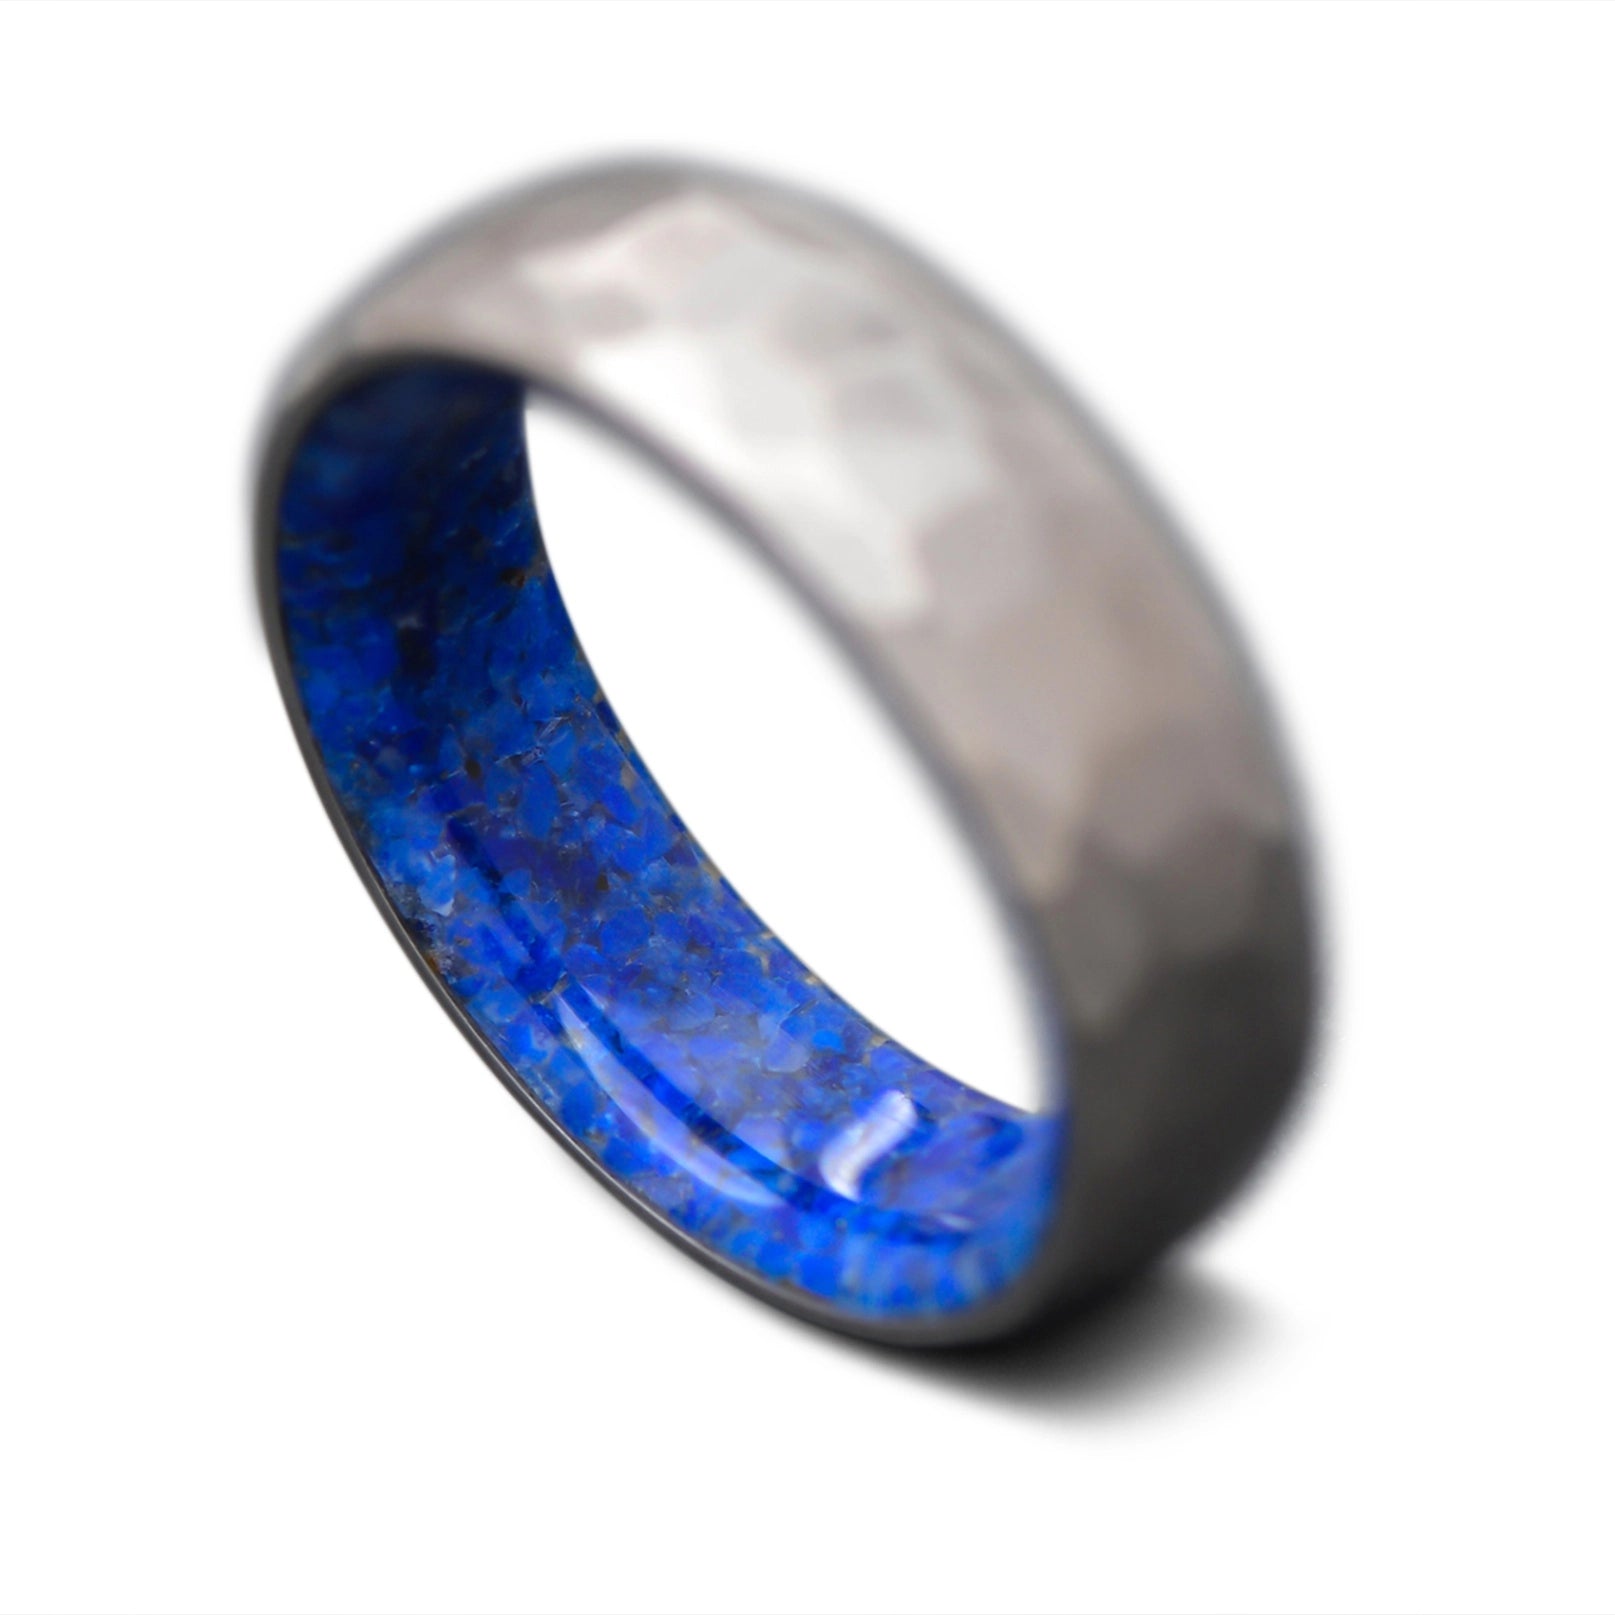 Back of Titanium Core Ring with  Lapis Lazuli inner sleeve, 7mm -THE TITAN